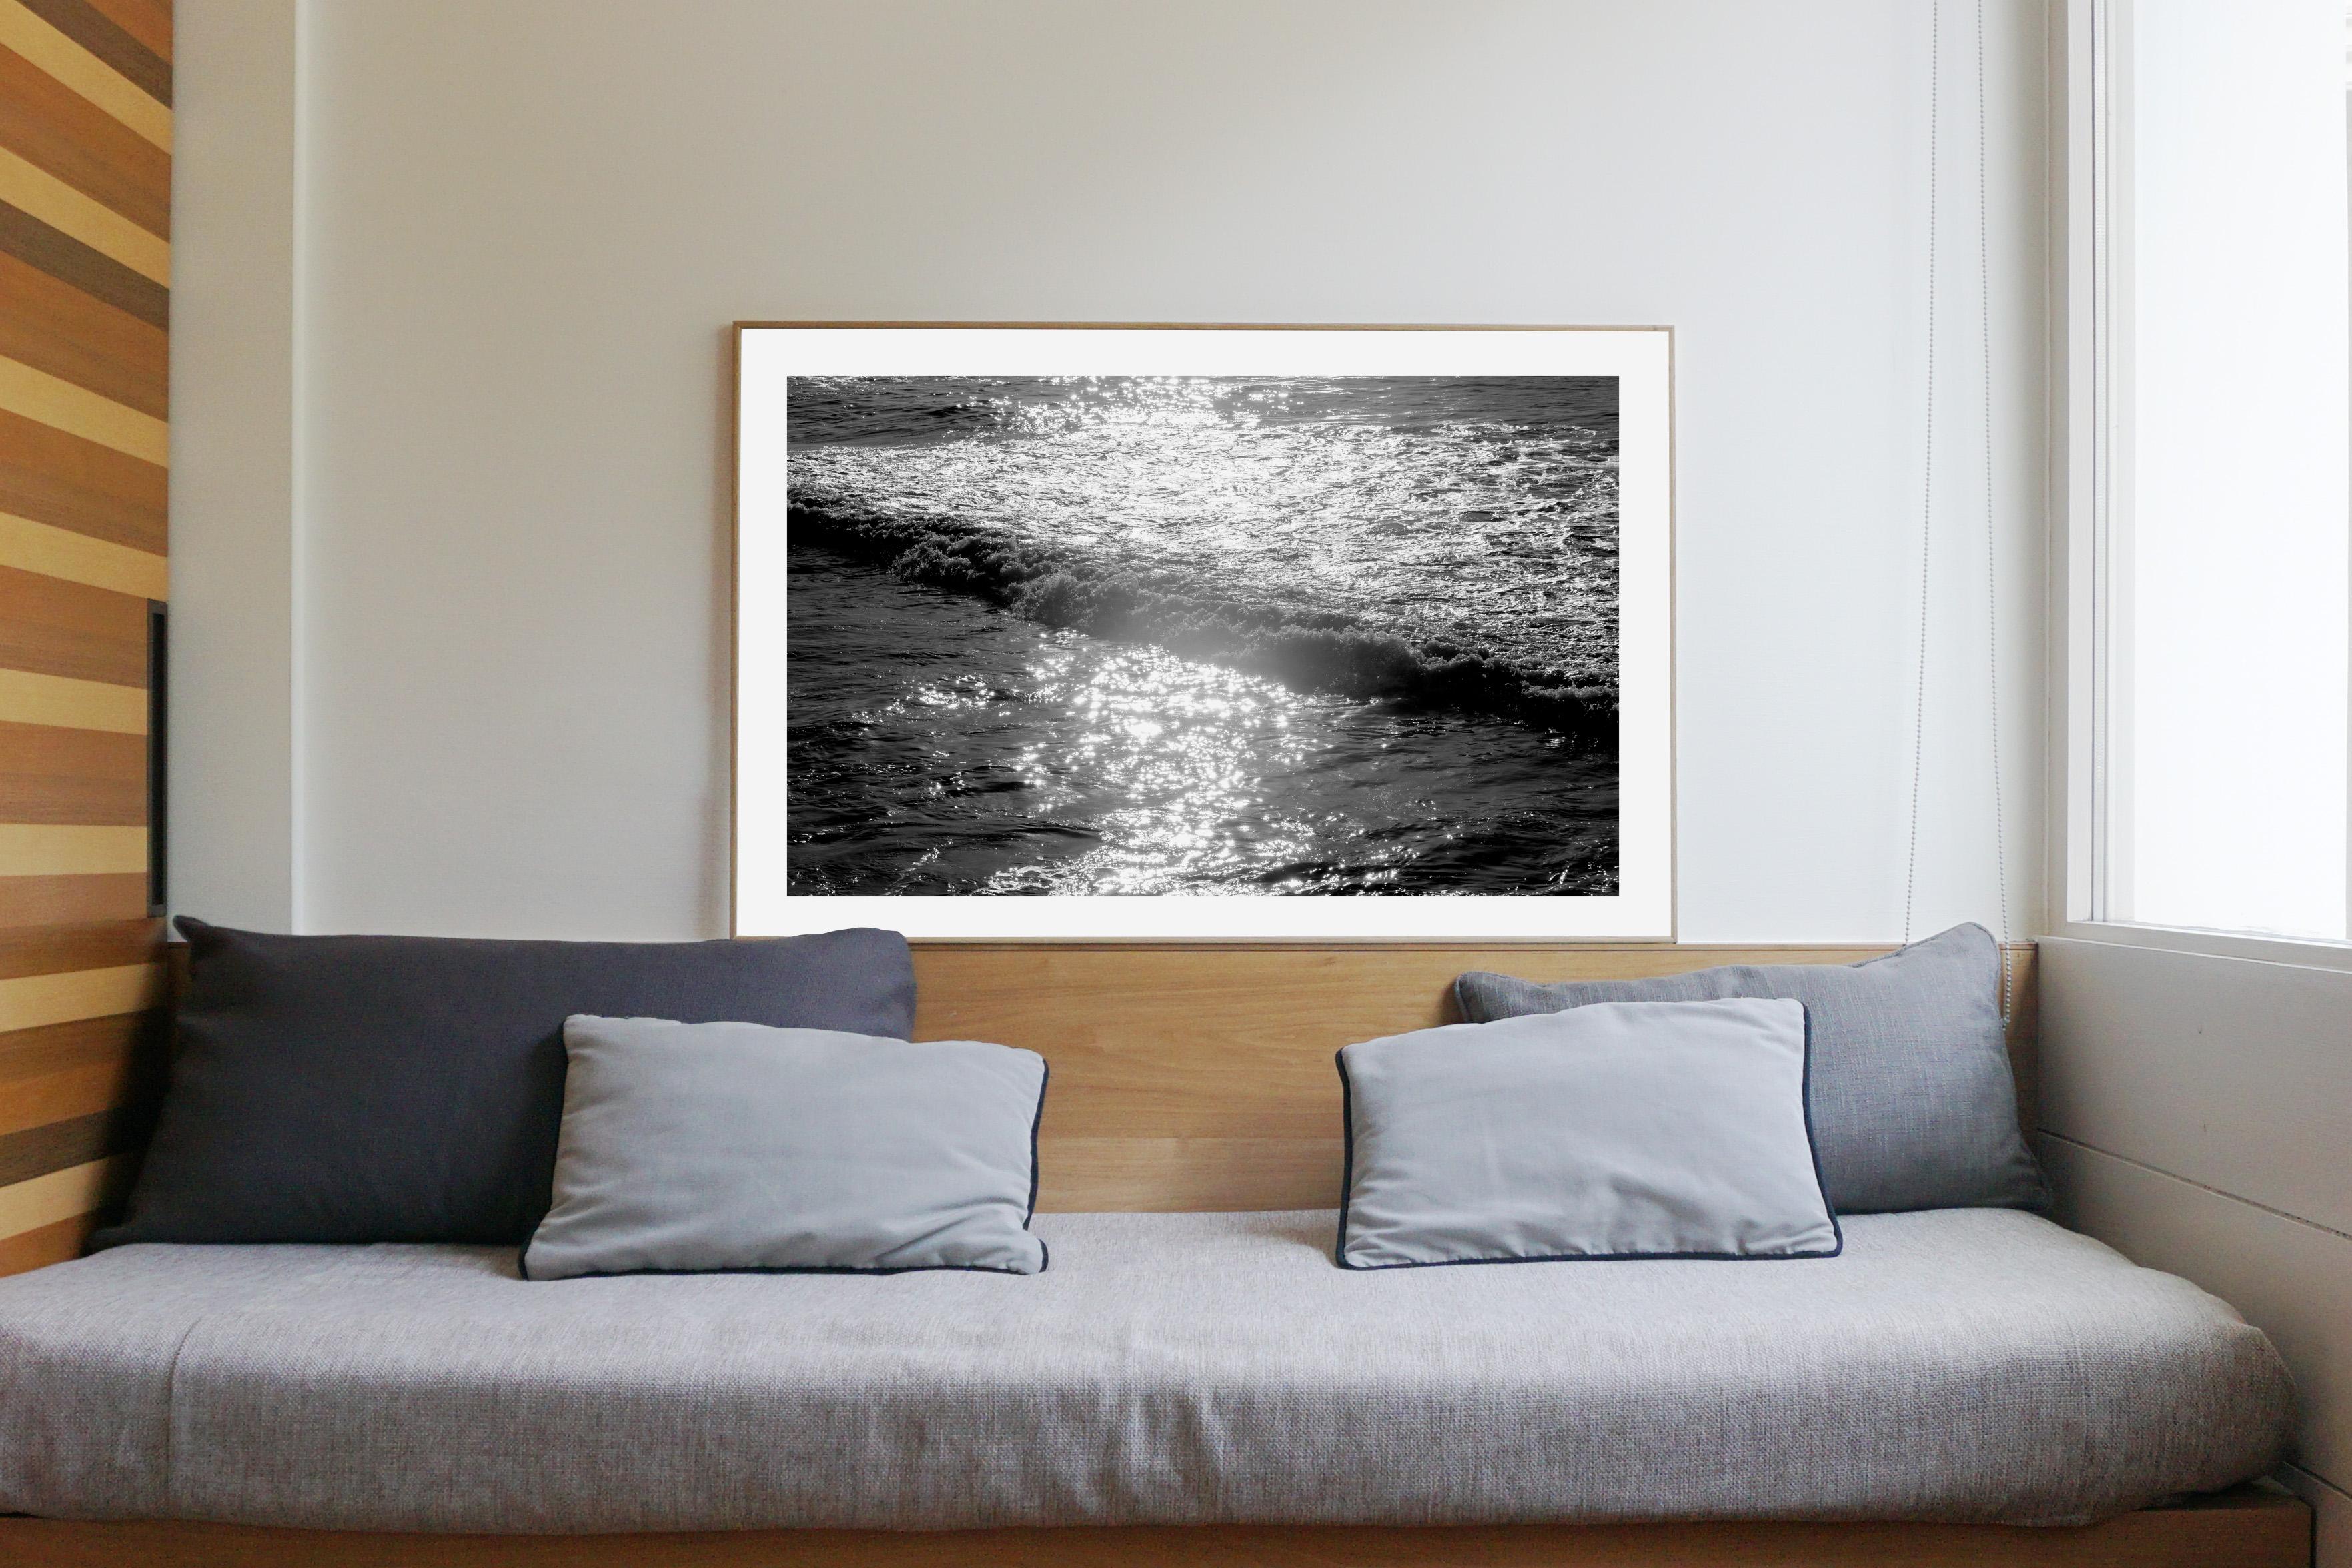 Water Reflection, Seascape Black and White Giclée Print, Pacific Sunset Waves - Photograph by Kind of Cyan